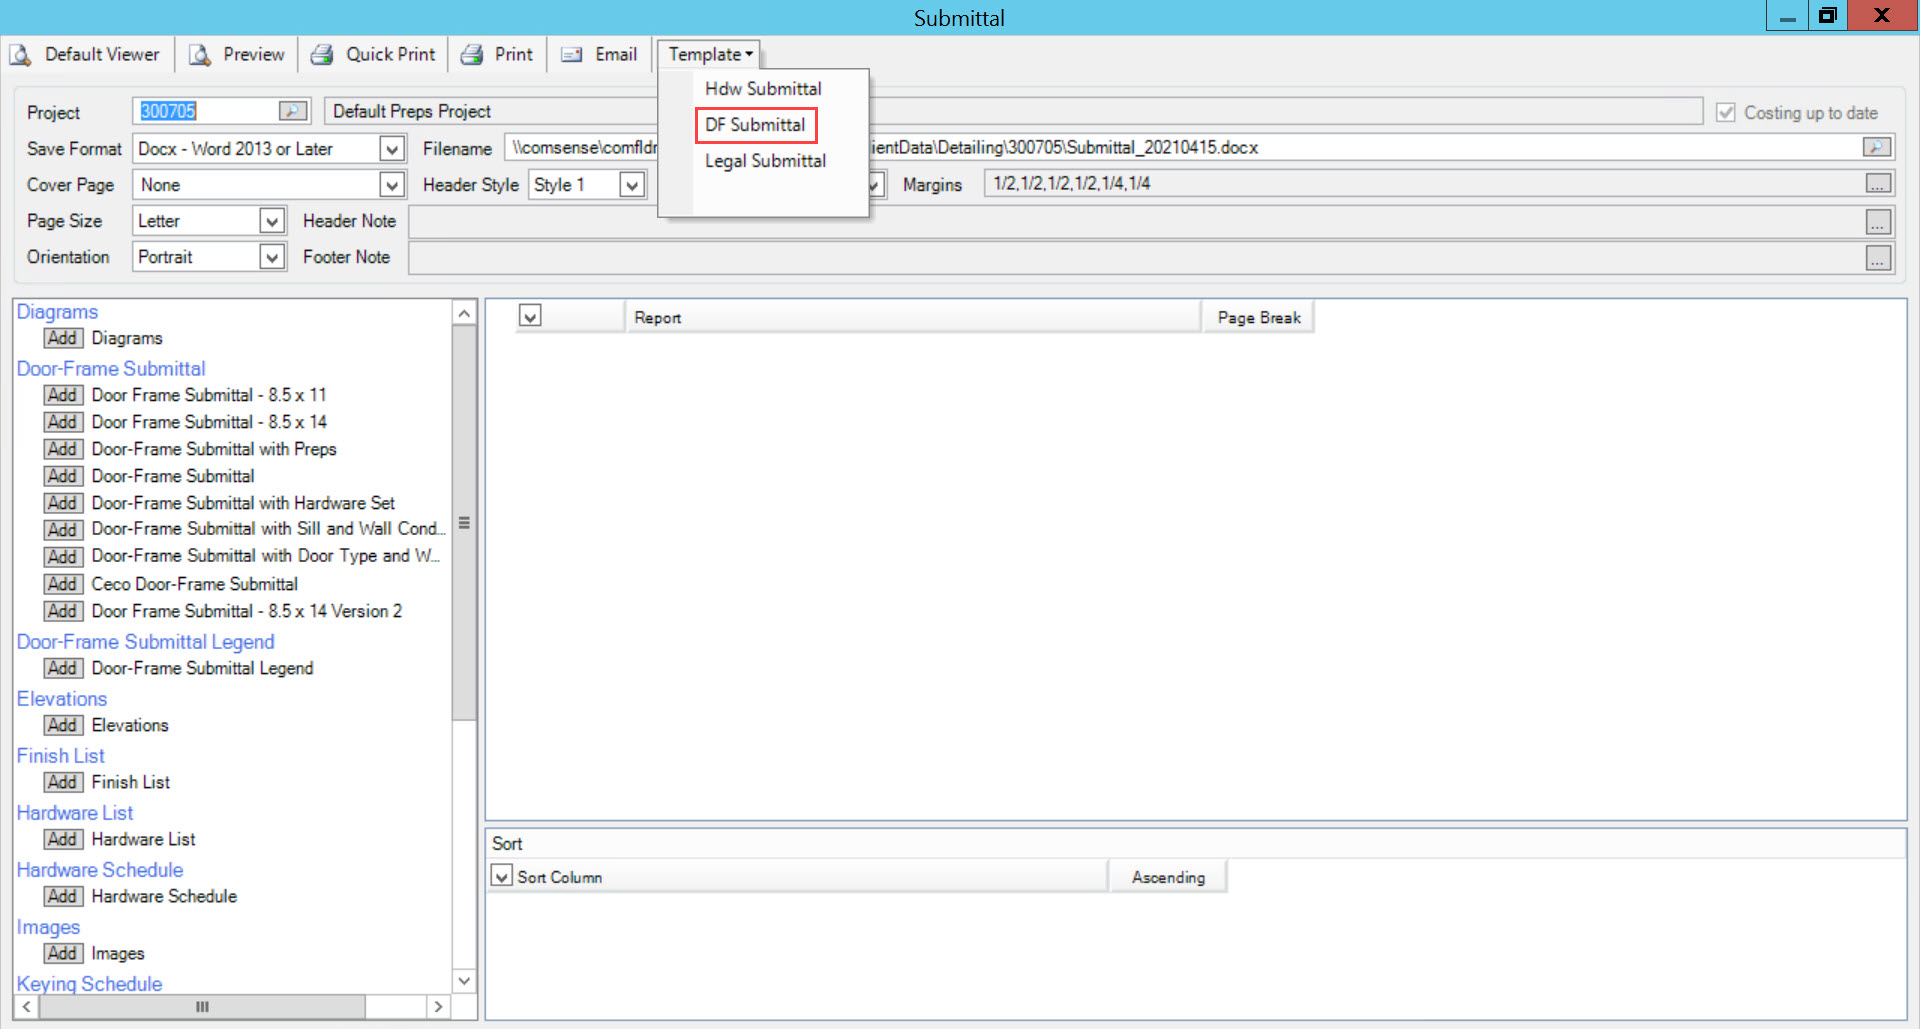 Submittal window; shows the location of the Templates drop-down list.